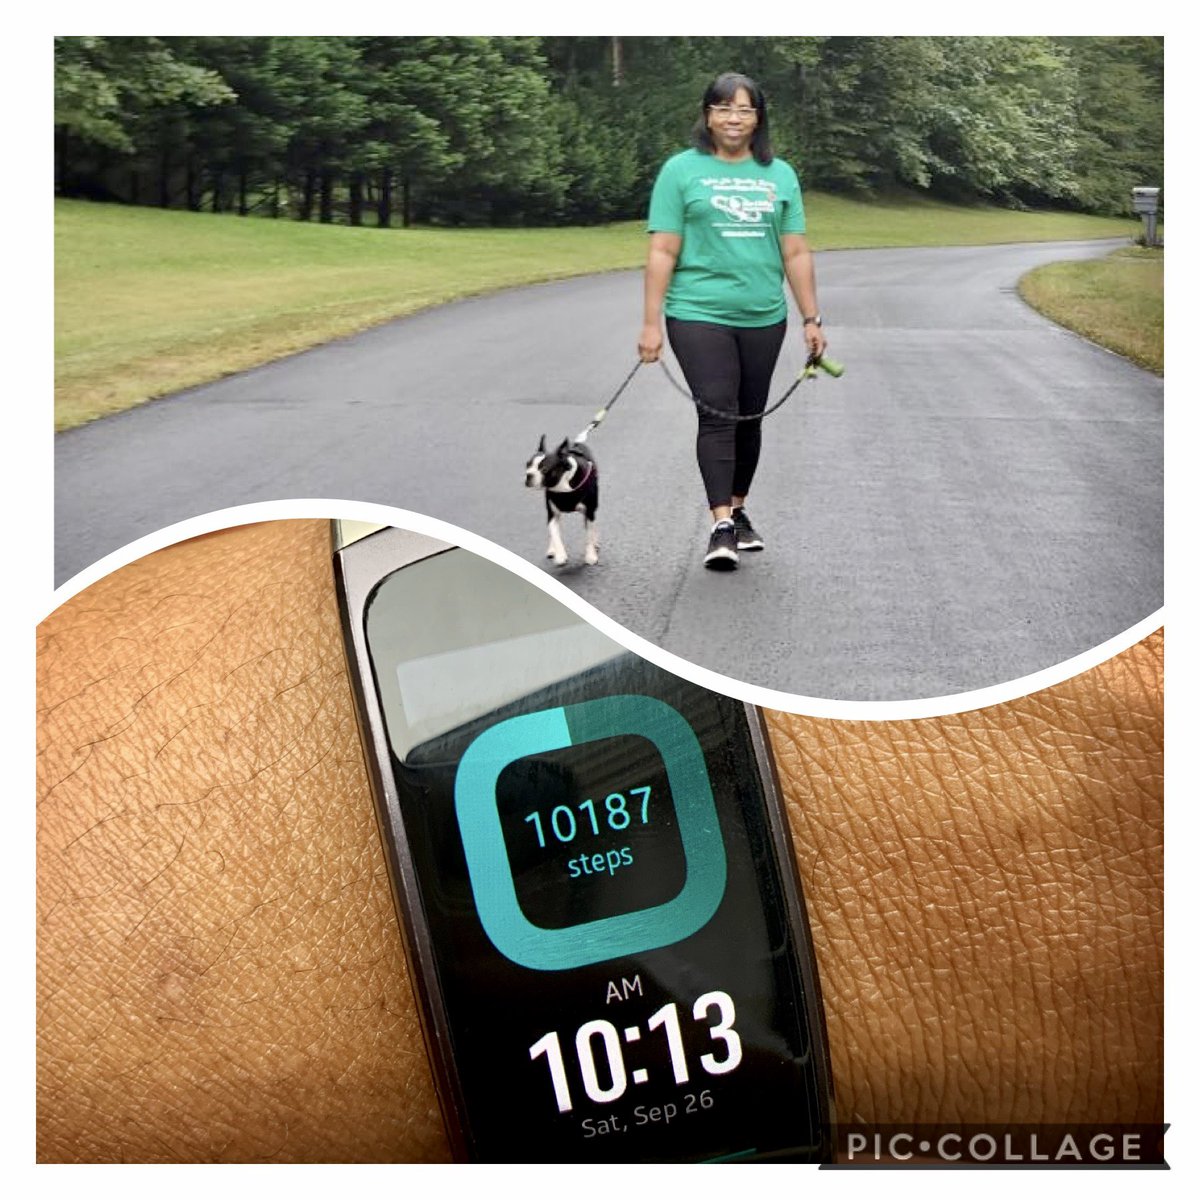 On the move with @thelinksinc Walk for Healthy Living 25th Annual Walk-a-thon #LinksOnTheMove  #walkforhealthyliving #linkswalk25 #LinksWalk25 #LinksOnTheMove25 #easternarealinks #odclinks